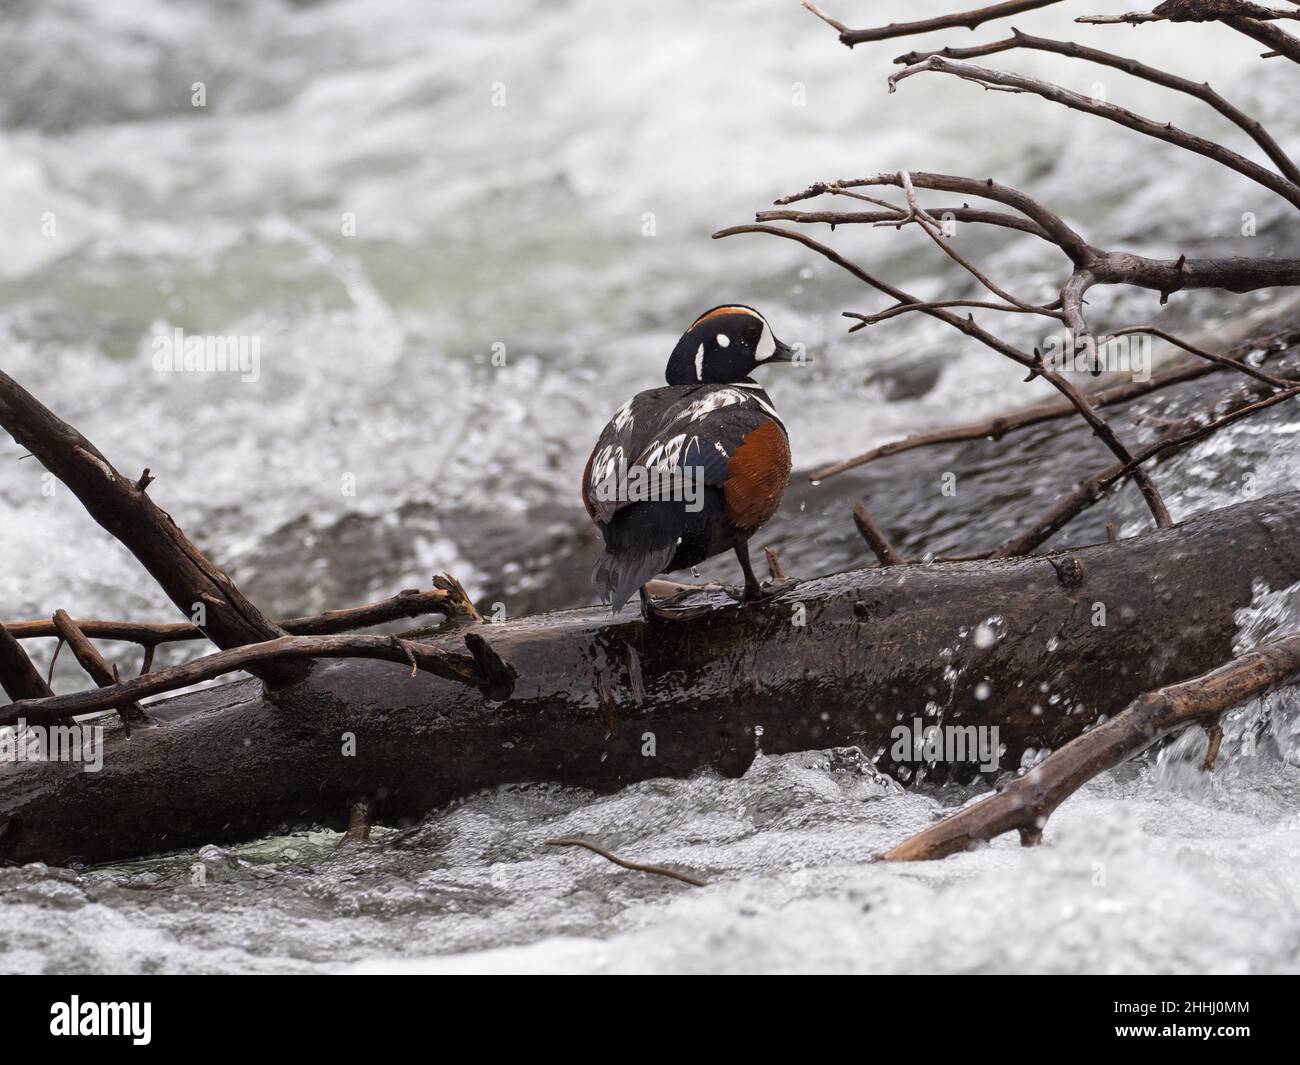 Harlequin duck Histrionicus histrionicus male standing on a fallen tree, LeHardy Rapids, Yellowstone River, Yellowstone National Park, Wyoming, USA, Stock Photo